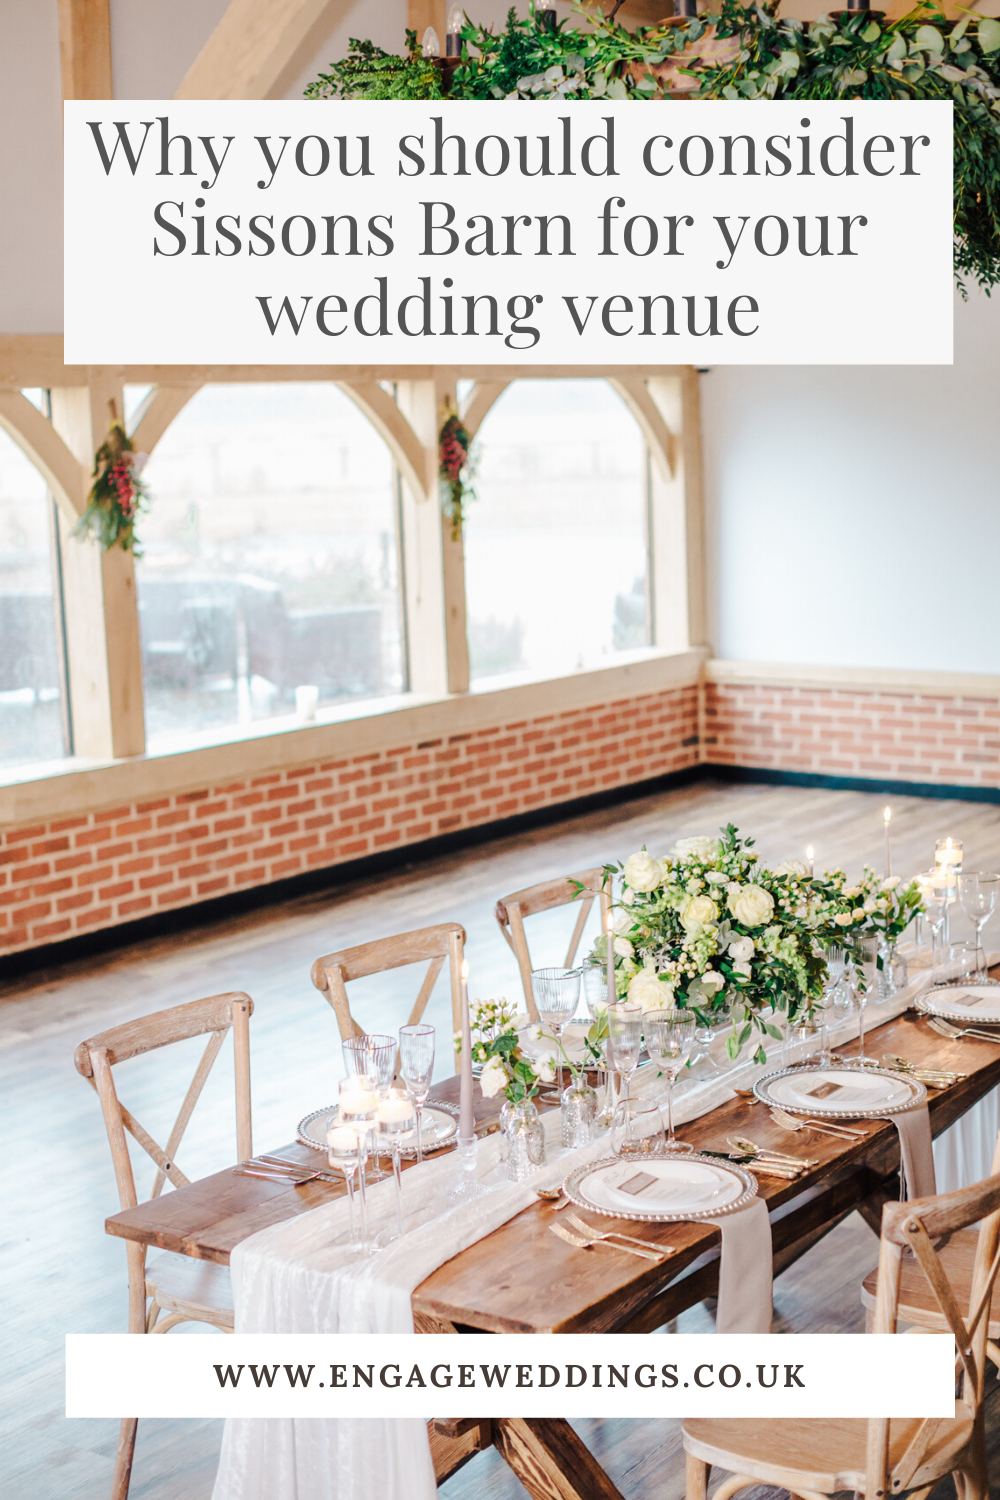 Why you should consider Sissons Barn for your wedding venue_engageweddings.co.uk